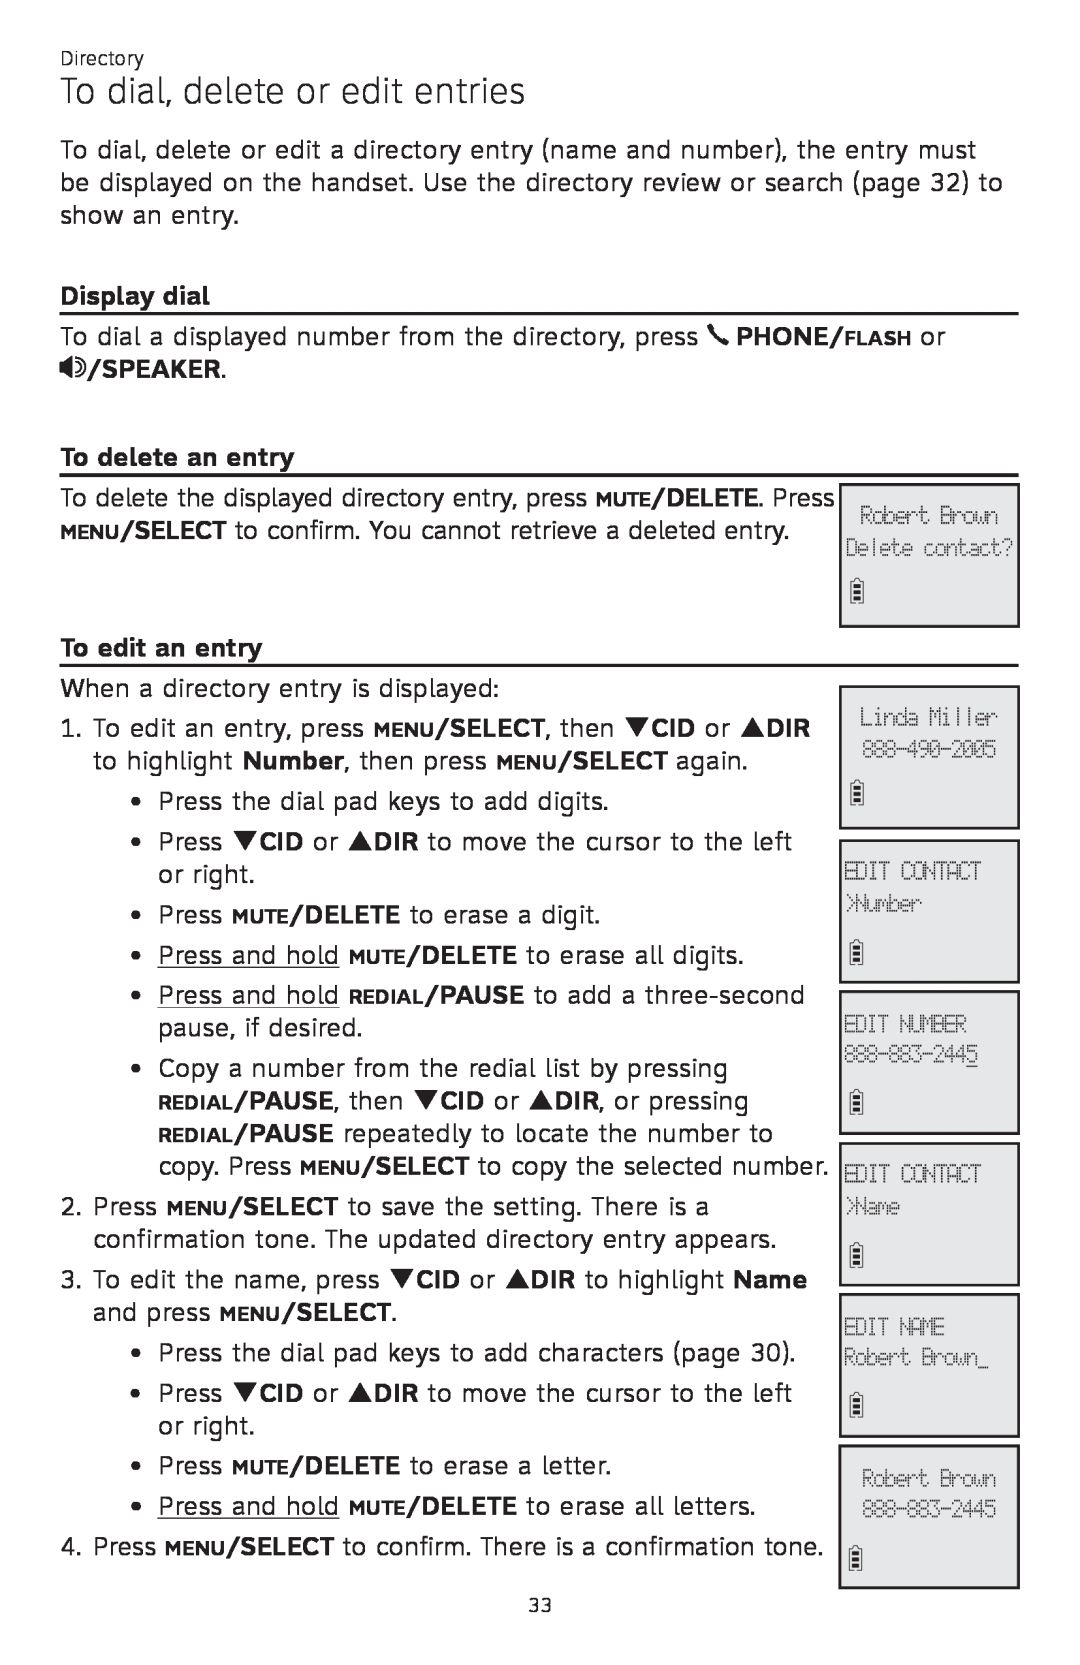 AT&T CL82450 user manual To dial, delete or edit entries, Display dial, To delete an entry, To edit an entry 